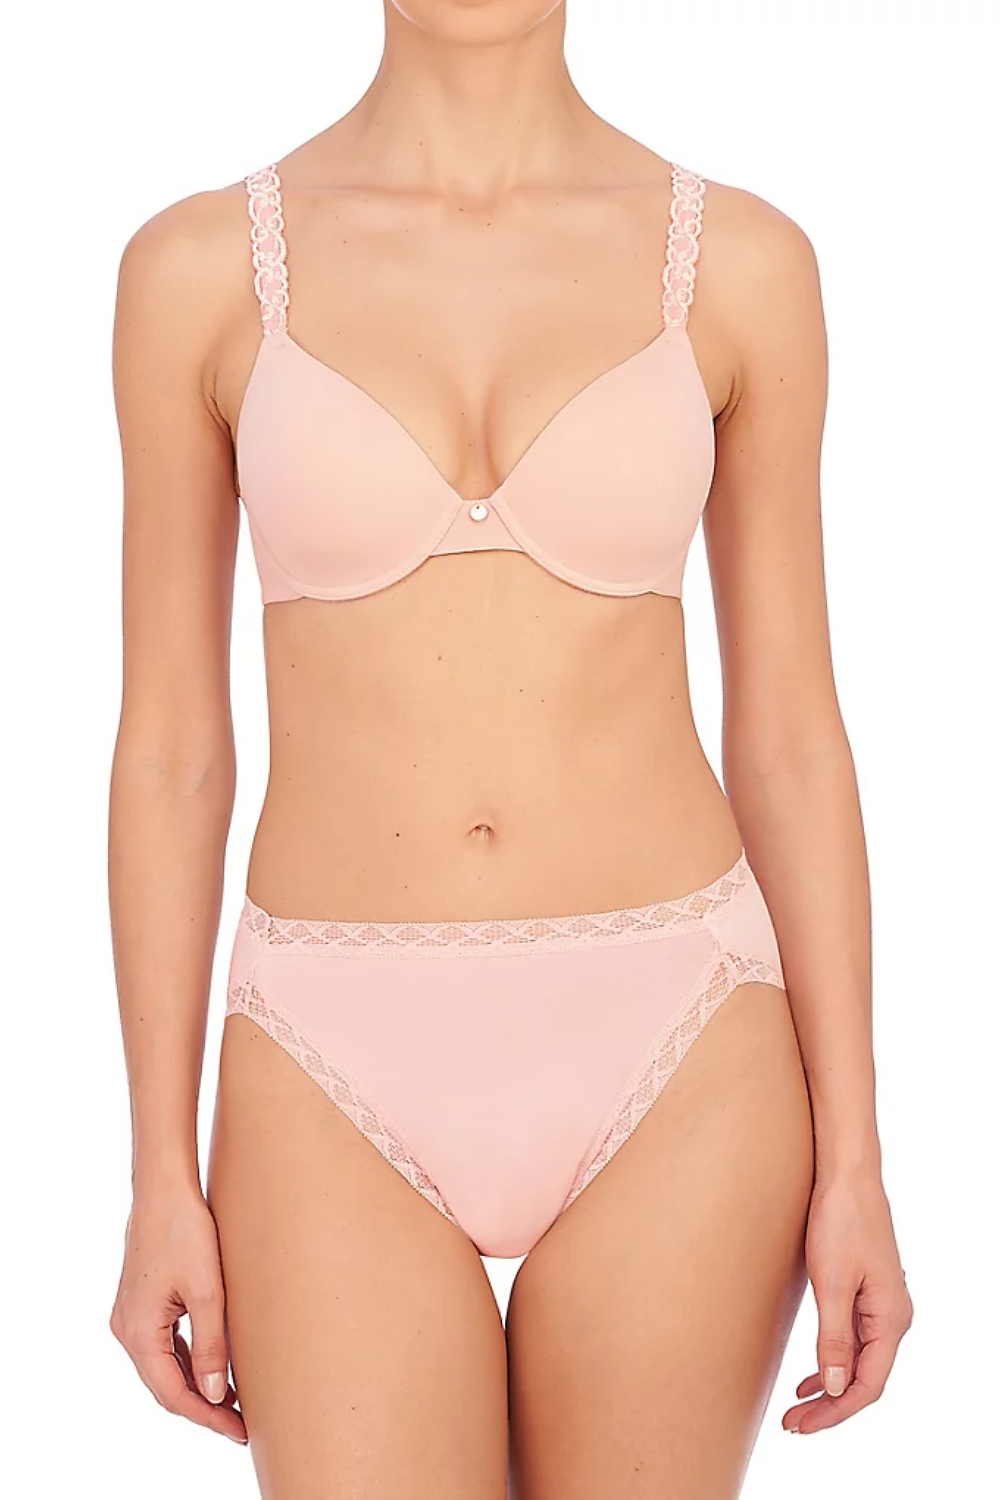 Bra Size Converter How To Get The Perfect Size Every Time